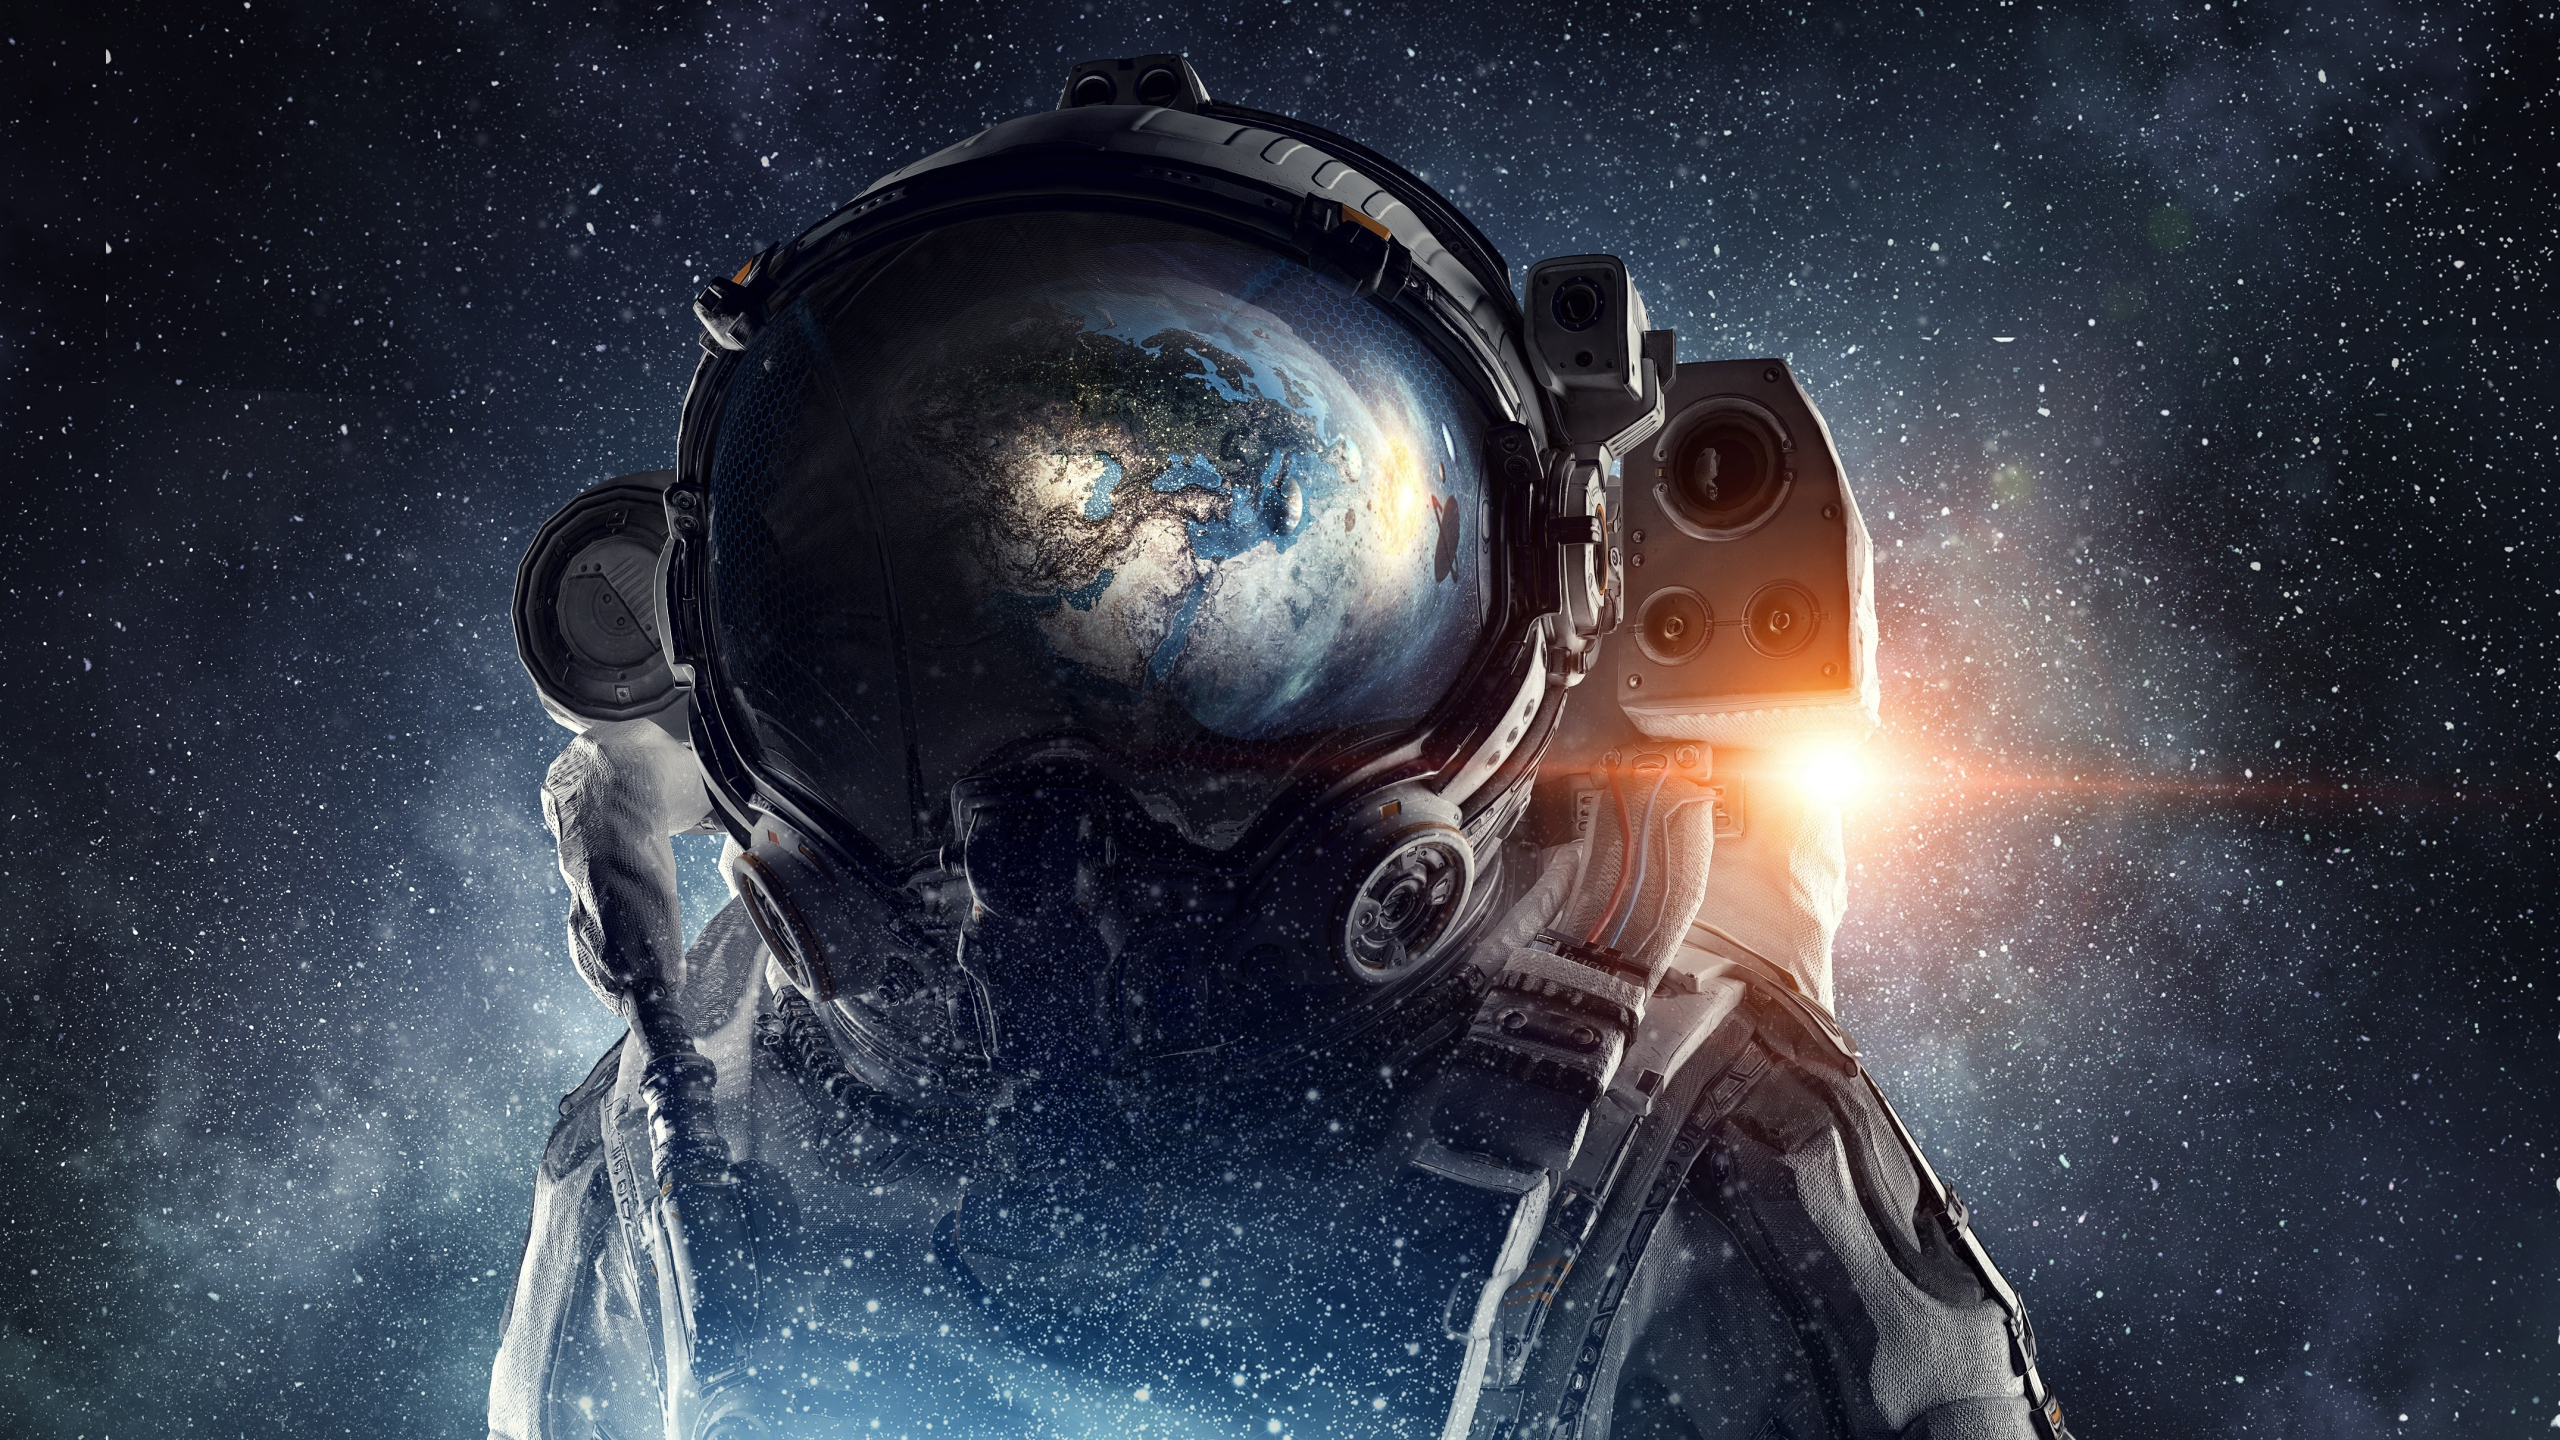 Download wallpaper 2560x1440 fantasy, astronaut, space, dual wide 16:9  2560x1440 hd background, 8388